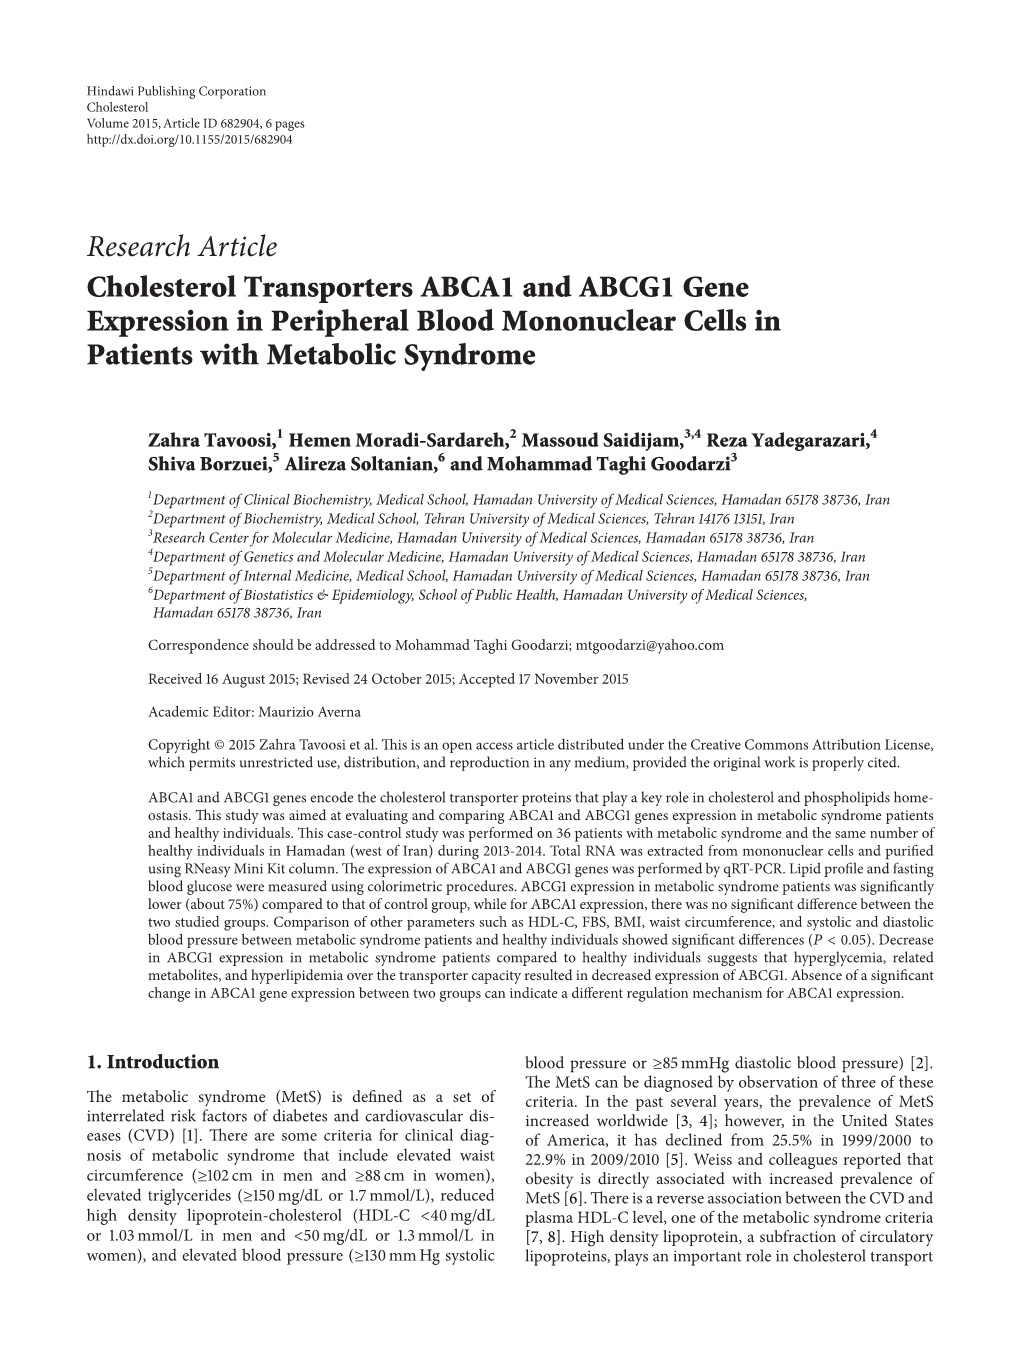 Cholesterol Transporters ABCA1 and ABCG1 Gene Expression in Peripheral Blood Mononuclear Cells in Patients with Metabolic Syndrome